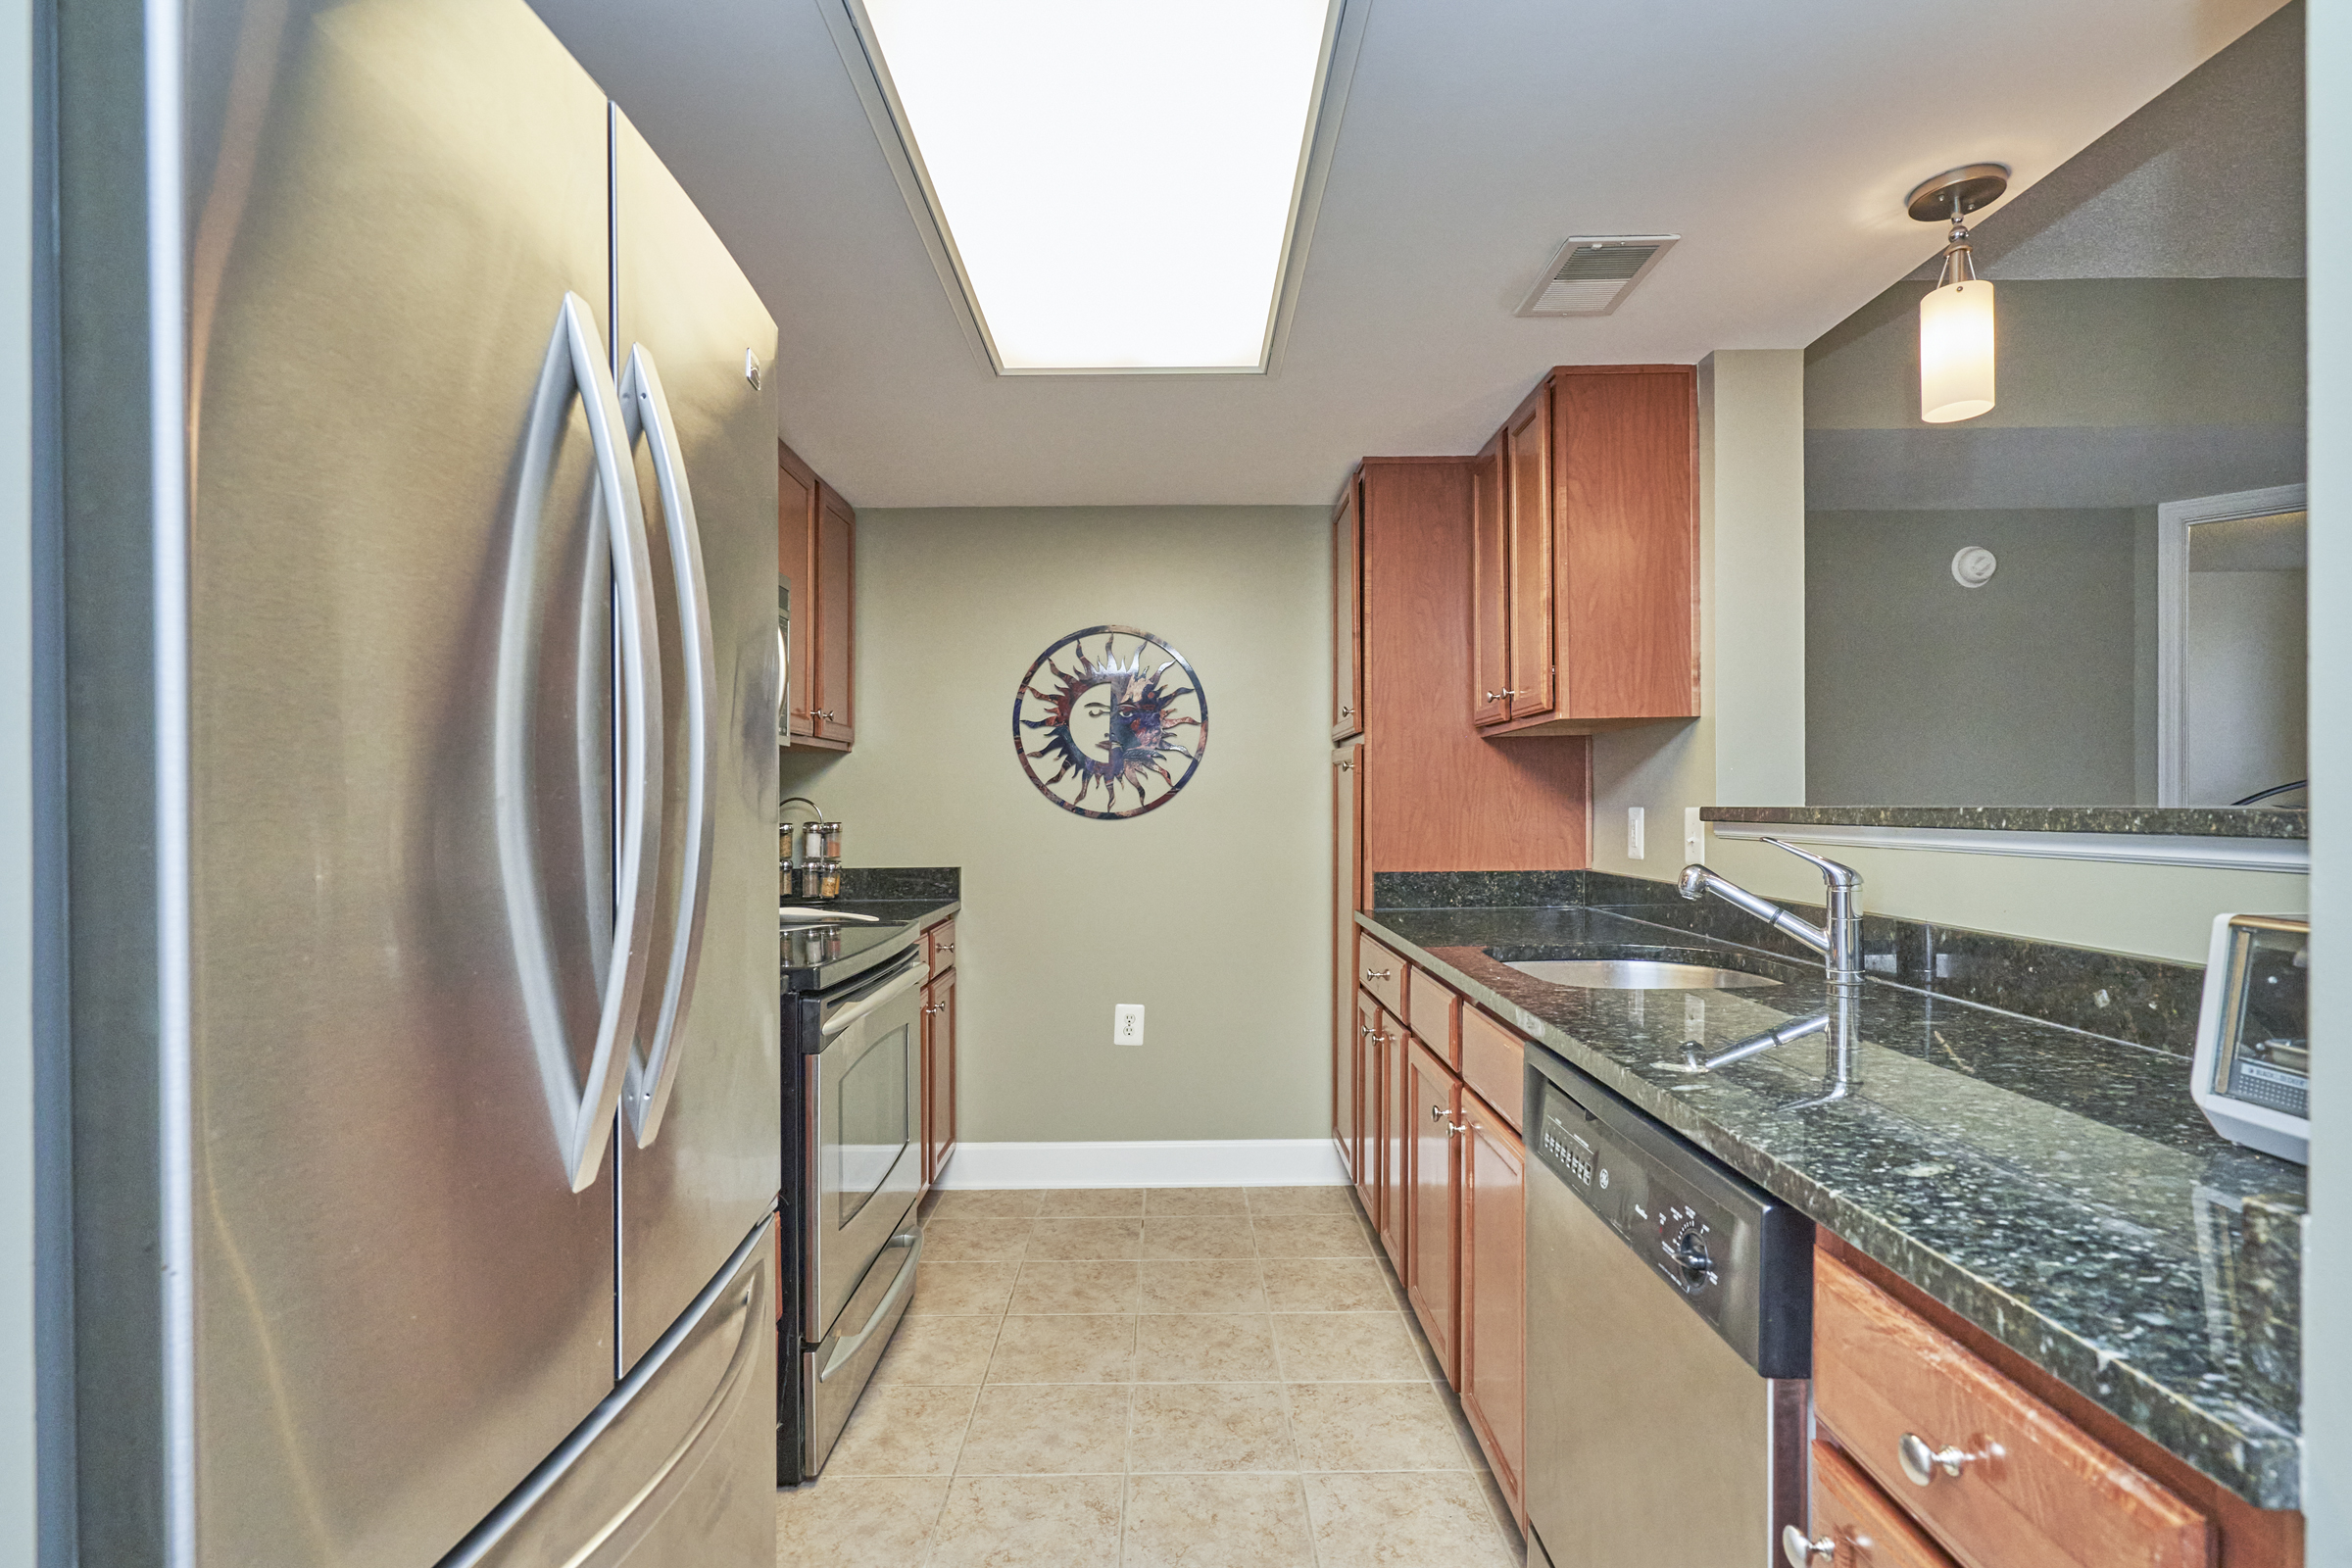 Interior professional photo of 11800 Sunset Hills Road Unit #811, showing the kitchen from the perspective of looking in from the hall. Stainless appliances and dark granite counters are seen with walnut cabinets